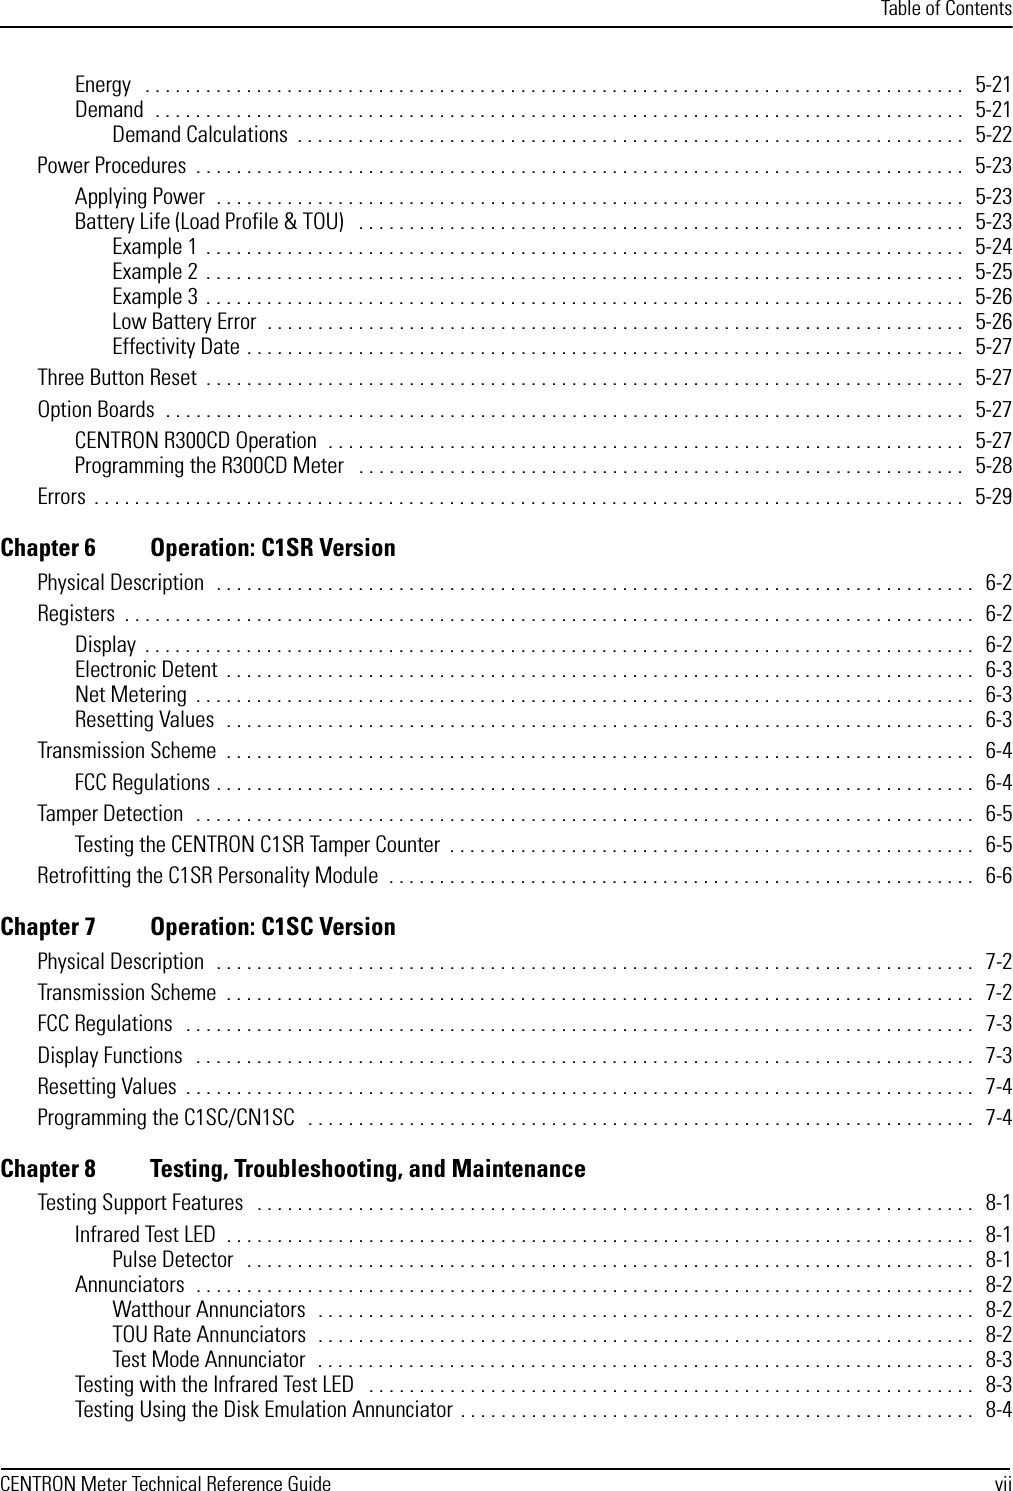 Table of ContentsCENTRON Meter Technical Reference Guide viiEnergy   . . . . . . . . . . . . . . . . . . . . . . . . . . . . . . . . . . . . . . . . . . . . . . . . . . . . . . . . . . . . . . . . . . . . . . . . . . . . . . . . .  5-21Demand  . . . . . . . . . . . . . . . . . . . . . . . . . . . . . . . . . . . . . . . . . . . . . . . . . . . . . . . . . . . . . . . . . . . . . . . . . . . . . . . .  5-21Demand Calculations  . . . . . . . . . . . . . . . . . . . . . . . . . . . . . . . . . . . . . . . . . . . . . . . . . . . . . . . . . . . . . . . . . .  5-22Power Procedures  . . . . . . . . . . . . . . . . . . . . . . . . . . . . . . . . . . . . . . . . . . . . . . . . . . . . . . . . . . . . . . . . . . . . . . . . . . . .   5-23Applying Power  . . . . . . . . . . . . . . . . . . . . . . . . . . . . . . . . . . . . . . . . . . . . . . . . . . . . . . . . . . . . . . . . . . . . . . . . . .  5-23Battery Life (Load Profile &amp; TOU)   . . . . . . . . . . . . . . . . . . . . . . . . . . . . . . . . . . . . . . . . . . . . . . . . . . . . . . . . . . . .   5-23Example 1  . . . . . . . . . . . . . . . . . . . . . . . . . . . . . . . . . . . . . . . . . . . . . . . . . . . . . . . . . . . . . . . . . . . . . . . . . . .  5-24Example 2  . . . . . . . . . . . . . . . . . . . . . . . . . . . . . . . . . . . . . . . . . . . . . . . . . . . . . . . . . . . . . . . . . . . . . . . . . . .  5-25Example 3  . . . . . . . . . . . . . . . . . . . . . . . . . . . . . . . . . . . . . . . . . . . . . . . . . . . . . . . . . . . . . . . . . . . . . . . . . . .  5-26Low Battery Error  . . . . . . . . . . . . . . . . . . . . . . . . . . . . . . . . . . . . . . . . . . . . . . . . . . . . . . . . . . . . . . . . . . . . .  5-26Effectivity Date . . . . . . . . . . . . . . . . . . . . . . . . . . . . . . . . . . . . . . . . . . . . . . . . . . . . . . . . . . . . . . . . . . . . . . .   5-27Three Button Reset  . . . . . . . . . . . . . . . . . . . . . . . . . . . . . . . . . . . . . . . . . . . . . . . . . . . . . . . . . . . . . . . . . . . . . . . . . . .  5-27Option Boards  . . . . . . . . . . . . . . . . . . . . . . . . . . . . . . . . . . . . . . . . . . . . . . . . . . . . . . . . . . . . . . . . . . . . . . . . . . . . . . .  5-27CENTRON R300CD Operation  . . . . . . . . . . . . . . . . . . . . . . . . . . . . . . . . . . . . . . . . . . . . . . . . . . . . . . . . . . . . . . .  5-27Programming the R300CD Meter   . . . . . . . . . . . . . . . . . . . . . . . . . . . . . . . . . . . . . . . . . . . . . . . . . . . . . . . . . . . .  5-28Errors  . . . . . . . . . . . . . . . . . . . . . . . . . . . . . . . . . . . . . . . . . . . . . . . . . . . . . . . . . . . . . . . . . . . . . . . . . . . . . . . . . . . . . .  5-29Chapter 6 Operation: C1SR VersionPhysical Description  . . . . . . . . . . . . . . . . . . . . . . . . . . . . . . . . . . . . . . . . . . . . . . . . . . . . . . . . . . . . . . . . . . . . . . . . . . .  6-2Registers  . . . . . . . . . . . . . . . . . . . . . . . . . . . . . . . . . . . . . . . . . . . . . . . . . . . . . . . . . . . . . . . . . . . . . . . . . . . . . . . . . . . .  6-2Display  . . . . . . . . . . . . . . . . . . . . . . . . . . . . . . . . . . . . . . . . . . . . . . . . . . . . . . . . . . . . . . . . . . . . . . . . . . . . . . . . . .  6-2Electronic Detent  . . . . . . . . . . . . . . . . . . . . . . . . . . . . . . . . . . . . . . . . . . . . . . . . . . . . . . . . . . . . . . . . . . . . . . . . . .  6-3Net Metering  . . . . . . . . . . . . . . . . . . . . . . . . . . . . . . . . . . . . . . . . . . . . . . . . . . . . . . . . . . . . . . . . . . . . . . . . . . . . .   6-3Resetting Values  . . . . . . . . . . . . . . . . . . . . . . . . . . . . . . . . . . . . . . . . . . . . . . . . . . . . . . . . . . . . . . . . . . . . . . . . . .  6-3Transmission Scheme  . . . . . . . . . . . . . . . . . . . . . . . . . . . . . . . . . . . . . . . . . . . . . . . . . . . . . . . . . . . . . . . . . . . . . . . . . .  6-4FCC Regulations . . . . . . . . . . . . . . . . . . . . . . . . . . . . . . . . . . . . . . . . . . . . . . . . . . . . . . . . . . . . . . . . . . . . . . . . . . .  6-4Tamper Detection  . . . . . . . . . . . . . . . . . . . . . . . . . . . . . . . . . . . . . . . . . . . . . . . . . . . . . . . . . . . . . . . . . . . . . . . . . . . . .  6-5Testing the CENTRON C1SR Tamper Counter  . . . . . . . . . . . . . . . . . . . . . . . . . . . . . . . . . . . . . . . . . . . . . . . . . . . .  6-5Retrofitting the C1SR Personality Module  . . . . . . . . . . . . . . . . . . . . . . . . . . . . . . . . . . . . . . . . . . . . . . . . . . . . . . . . . .  6-6Chapter 7 Operation: C1SC VersionPhysical Description  . . . . . . . . . . . . . . . . . . . . . . . . . . . . . . . . . . . . . . . . . . . . . . . . . . . . . . . . . . . . . . . . . . . . . . . . . . .  7-2Transmission Scheme  . . . . . . . . . . . . . . . . . . . . . . . . . . . . . . . . . . . . . . . . . . . . . . . . . . . . . . . . . . . . . . . . . . . . . . . . . .   7-2FCC Regulations   . . . . . . . . . . . . . . . . . . . . . . . . . . . . . . . . . . . . . . . . . . . . . . . . . . . . . . . . . . . . . . . . . . . . . . . . . . . . . .  7-3Display Functions  . . . . . . . . . . . . . . . . . . . . . . . . . . . . . . . . . . . . . . . . . . . . . . . . . . . . . . . . . . . . . . . . . . . . . . . . . . . . .  7-3Resetting Values  . . . . . . . . . . . . . . . . . . . . . . . . . . . . . . . . . . . . . . . . . . . . . . . . . . . . . . . . . . . . . . . . . . . . . . . . . . . . . .  7-4Programming the C1SC/CN1SC   . . . . . . . . . . . . . . . . . . . . . . . . . . . . . . . . . . . . . . . . . . . . . . . . . . . . . . . . . . . . . . . . . .  7-4Chapter 8 Testing, Troubleshooting, and MaintenanceTesting Support Features   . . . . . . . . . . . . . . . . . . . . . . . . . . . . . . . . . . . . . . . . . . . . . . . . . . . . . . . . . . . . . . . . . . . . . . .  8-1Infrared Test LED  . . . . . . . . . . . . . . . . . . . . . . . . . . . . . . . . . . . . . . . . . . . . . . . . . . . . . . . . . . . . . . . . . . . . . . . . . .  8-1Pulse Detector   . . . . . . . . . . . . . . . . . . . . . . . . . . . . . . . . . . . . . . . . . . . . . . . . . . . . . . . . . . . . . . . . . . . . . . . .  8-1Annunciators  . . . . . . . . . . . . . . . . . . . . . . . . . . . . . . . . . . . . . . . . . . . . . . . . . . . . . . . . . . . . . . . . . . . . . . . . . . . . .  8-2Watthour Annunciators  . . . . . . . . . . . . . . . . . . . . . . . . . . . . . . . . . . . . . . . . . . . . . . . . . . . . . . . . . . . . . . . . .  8-2TOU Rate Annunciators  . . . . . . . . . . . . . . . . . . . . . . . . . . . . . . . . . . . . . . . . . . . . . . . . . . . . . . . . . . . . . . . . .  8-2Test Mode Annunciator  . . . . . . . . . . . . . . . . . . . . . . . . . . . . . . . . . . . . . . . . . . . . . . . . . . . . . . . . . . . . . . . . .  8-3Testing with the Infrared Test LED   . . . . . . . . . . . . . . . . . . . . . . . . . . . . . . . . . . . . . . . . . . . . . . . . . . . . . . . . . . . .  8-3Testing Using the Disk Emulation Annunciator . . . . . . . . . . . . . . . . . . . . . . . . . . . . . . . . . . . . . . . . . . . . . . . . . . .  8-4